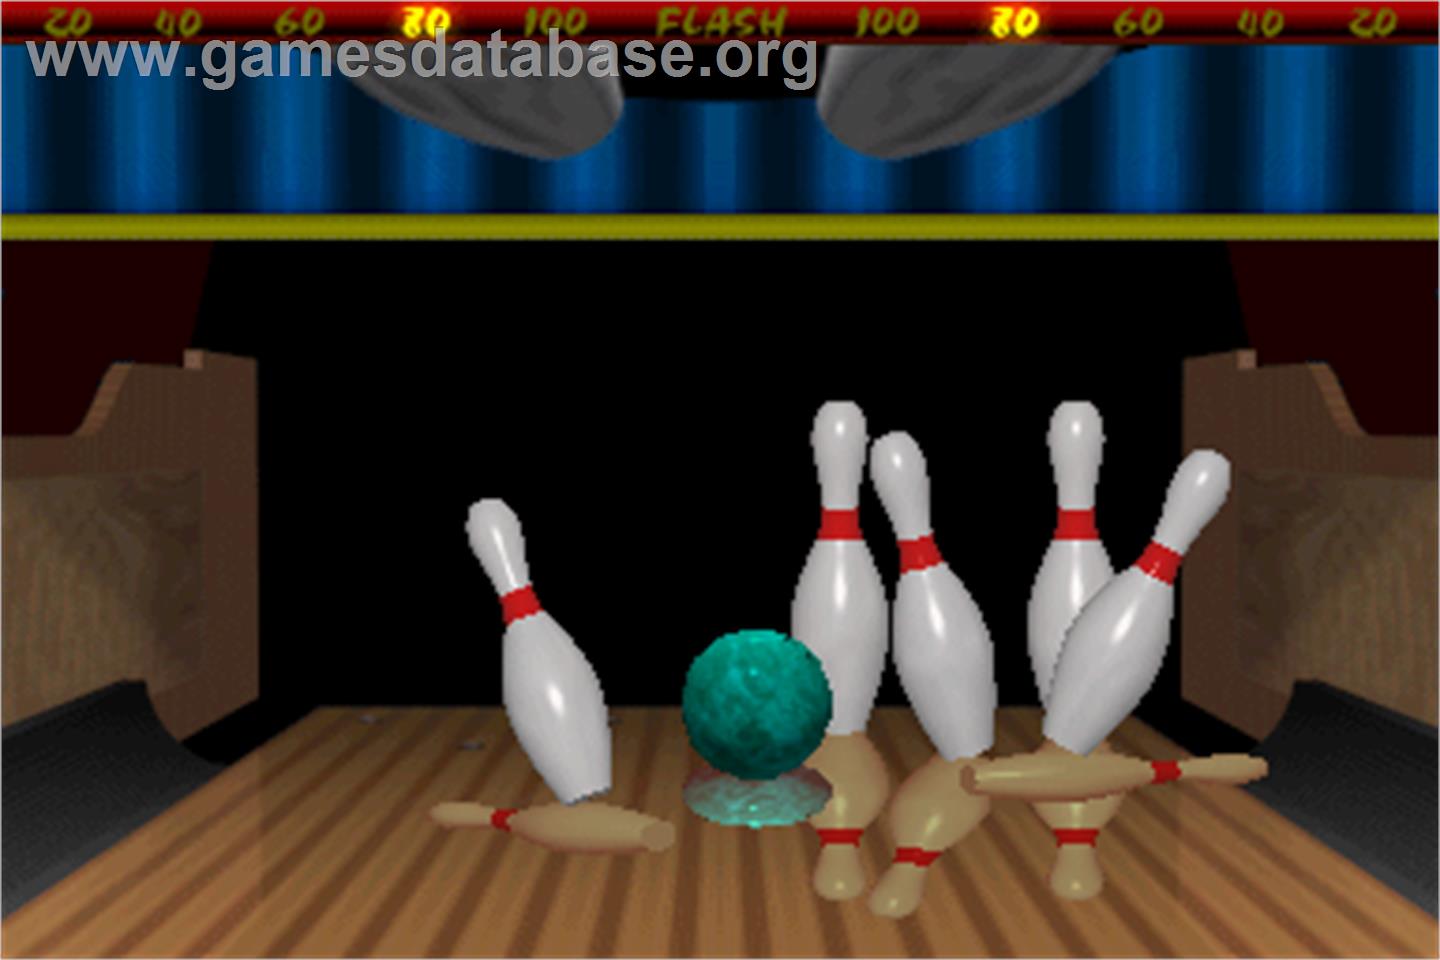 World Class Bowling Deluxe - Arcade - Artwork - In Game